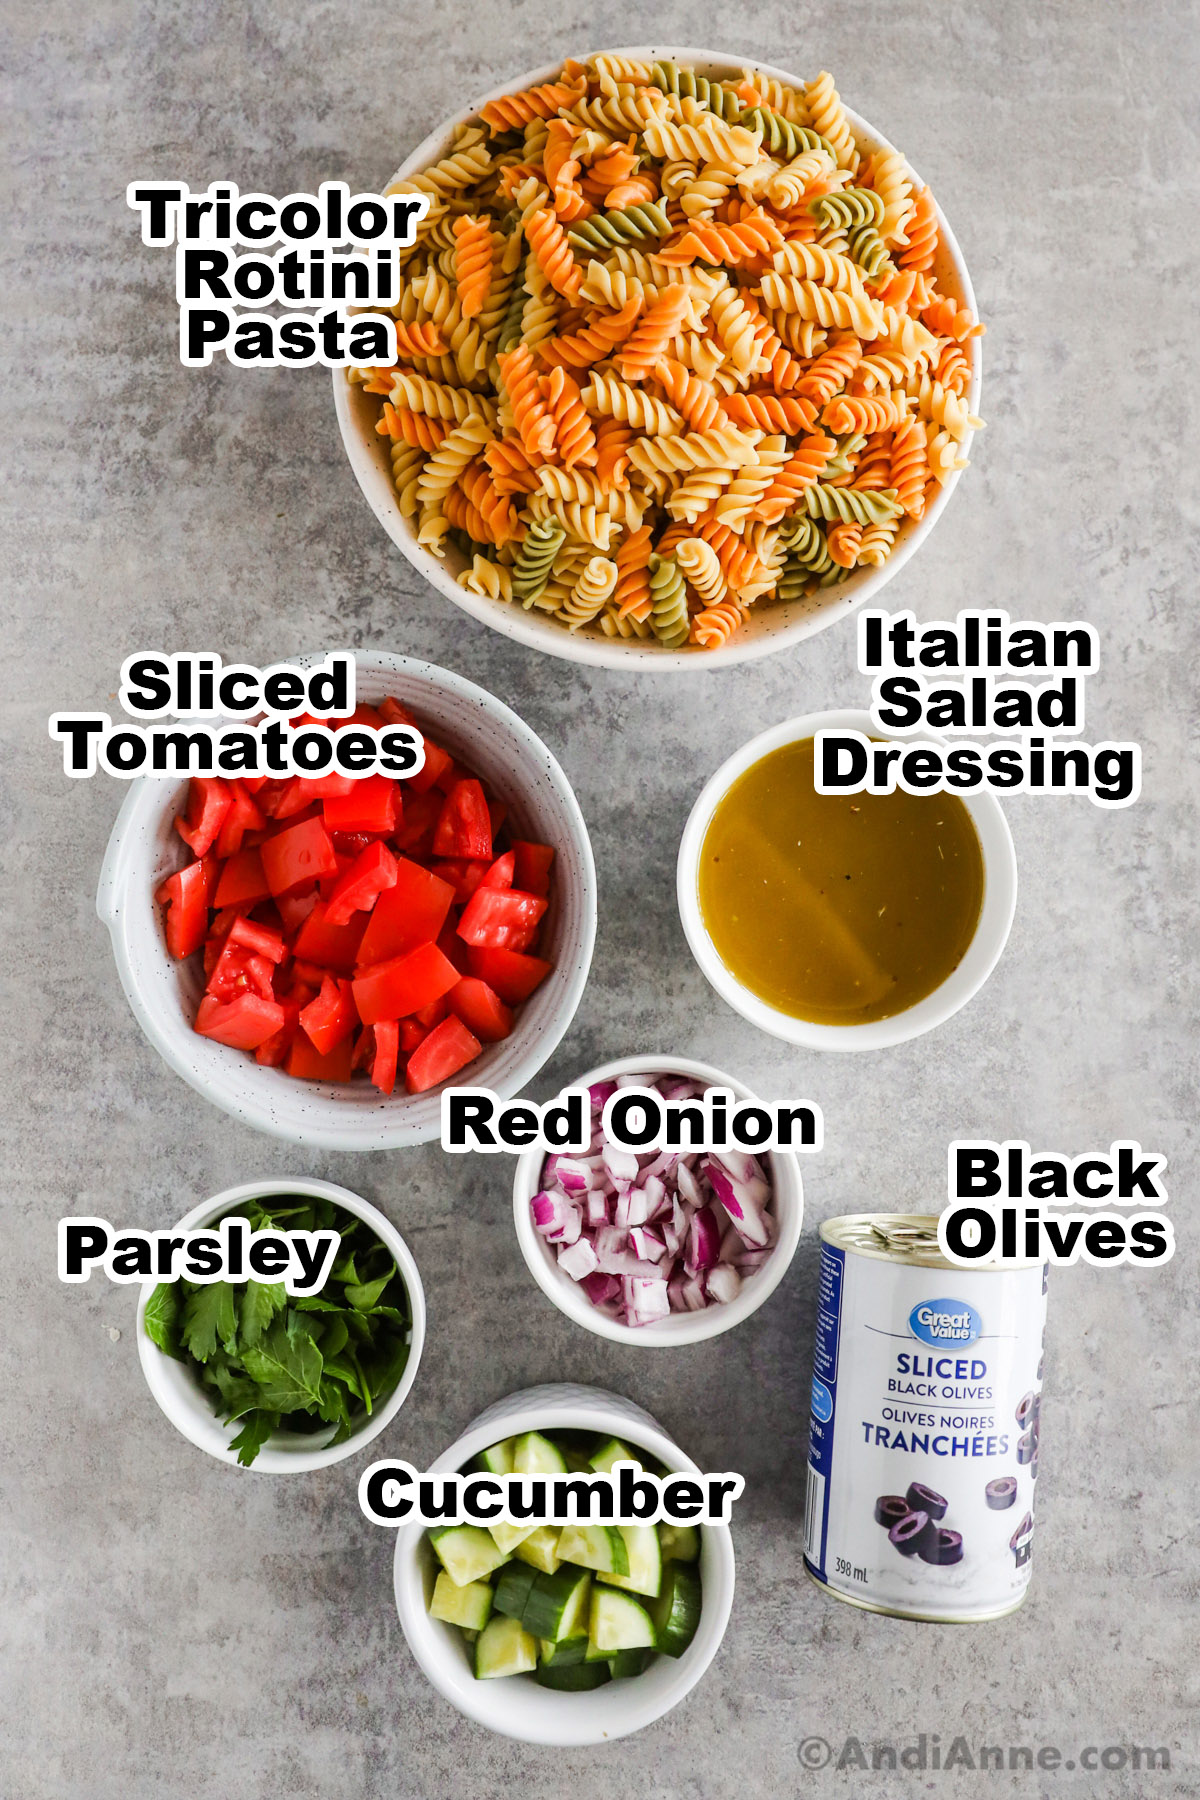 Recipe ingredients on a counter including a bowl of rotini pasta, bowls of tomatoes, salad dressing, red onion, parsley, cucumber and canned black olives.